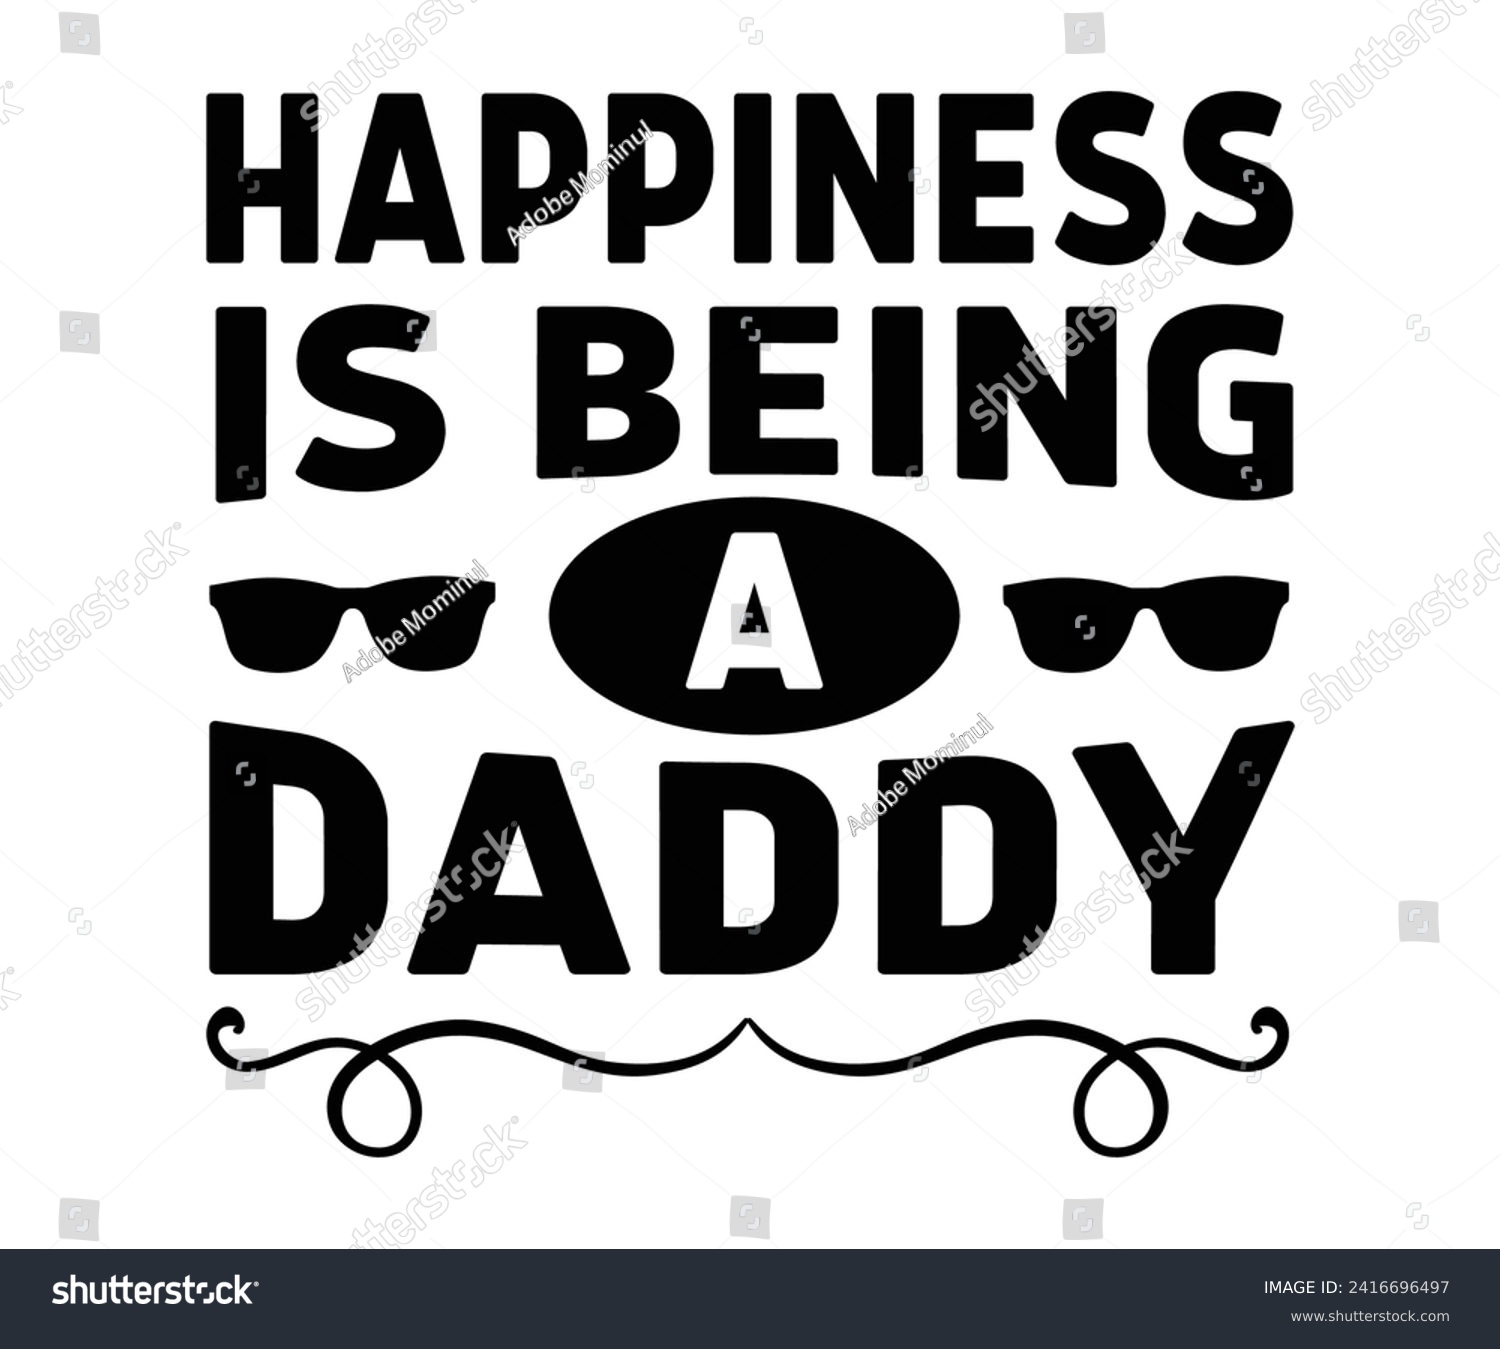 SVG of Happiness is Being a Daddy Svg,Father's Day Svg,Papa svg,Grandpa Svg,Father's Day Saying Qoutes,Dad Svg,Funny Father, Gift For Dad Svg,Daddy Svg,Family Svg,T shirt Design,Svg Cut File,Typography svg